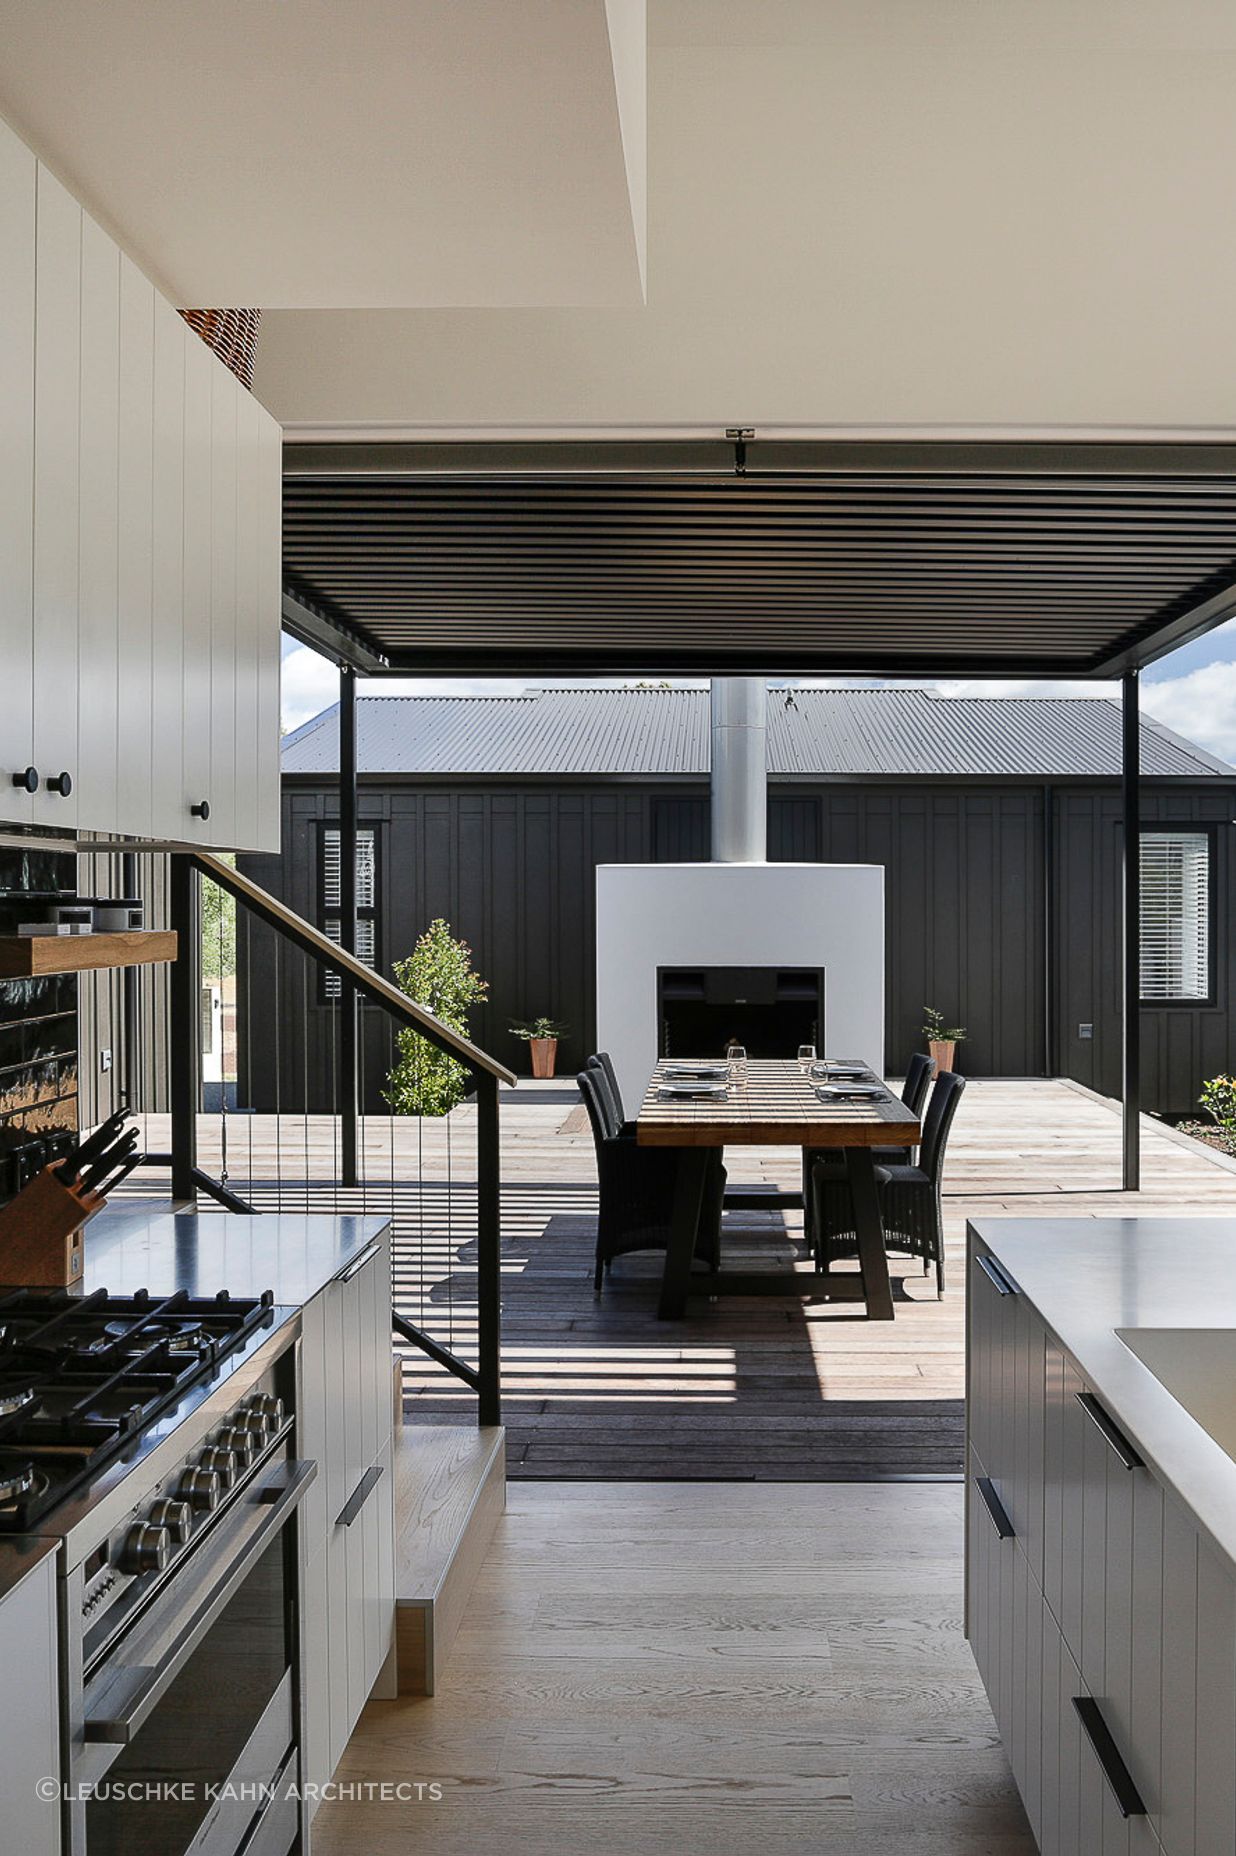 The addition of a louvre roof maximises indoor-outdoor flow from the kitchen and creates a welcoming outdoor space.